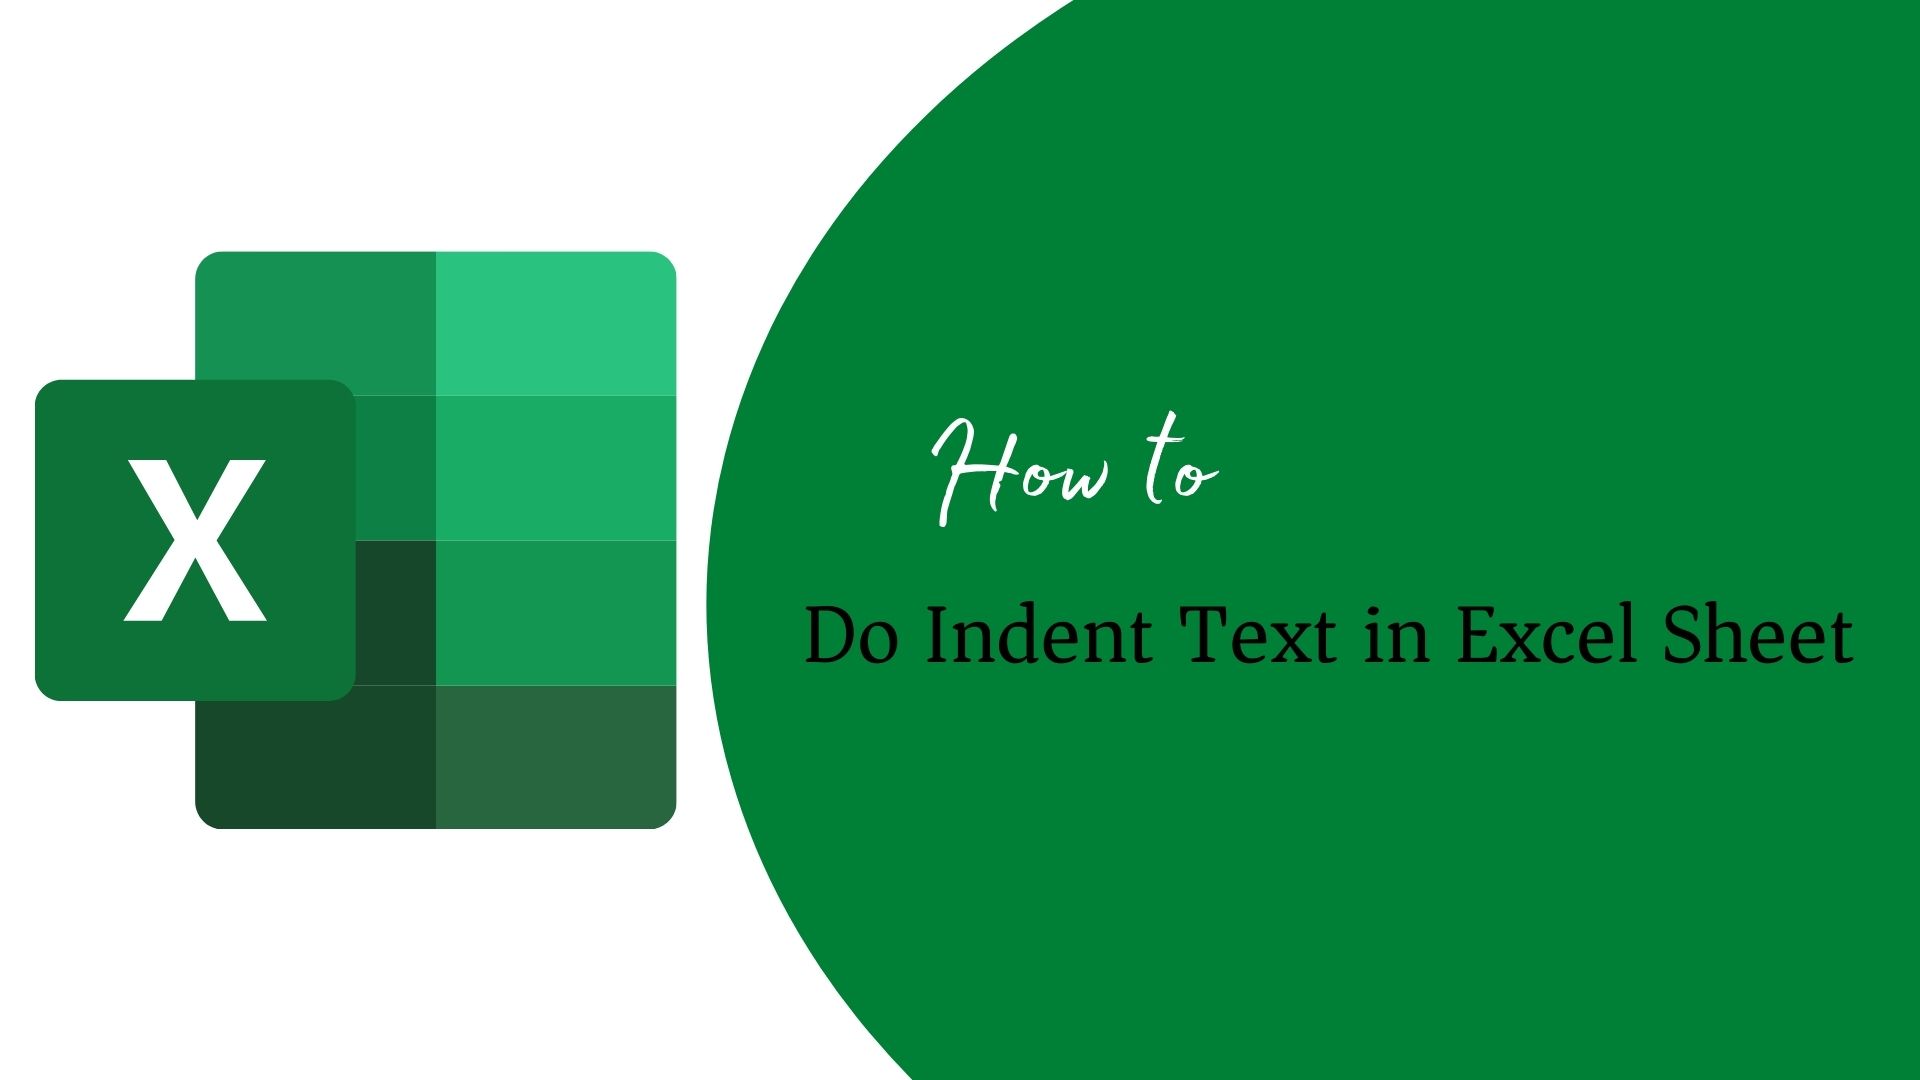 Indent Text in Excel Sheet